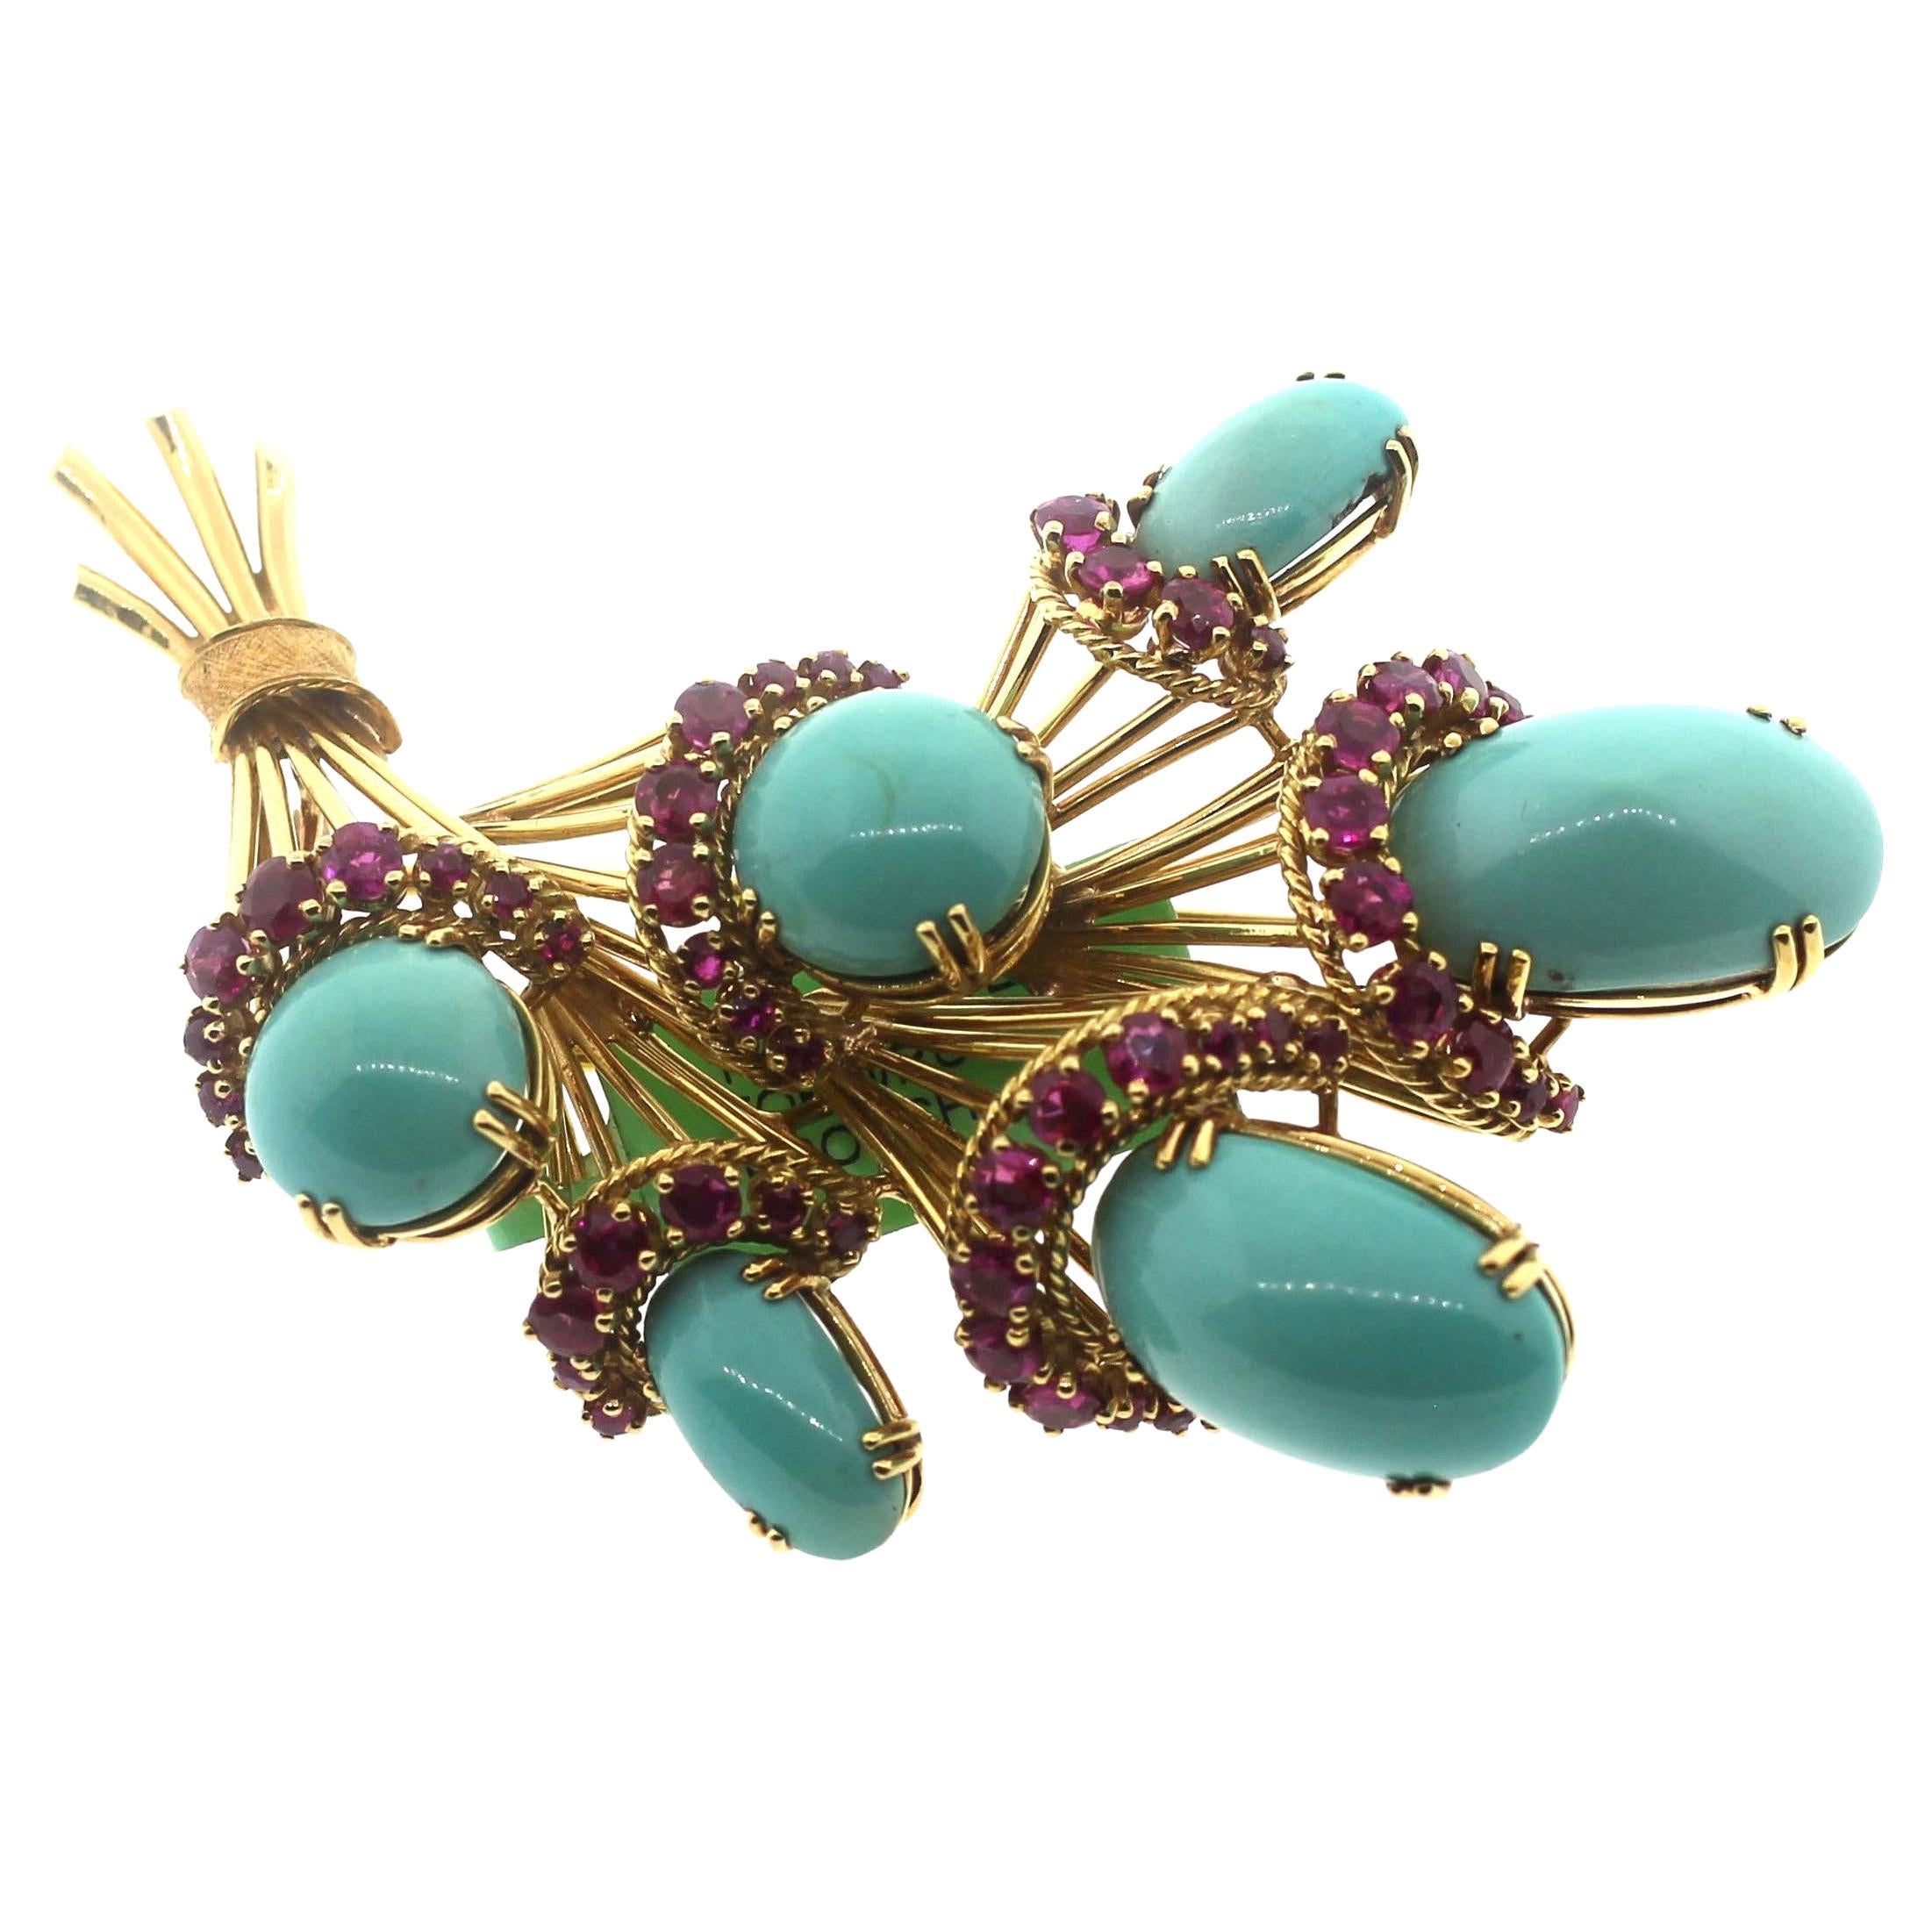 Cabochon Jewel Of Ocean Estate jewelry Bouquet Turquoise and Ruby Brooch